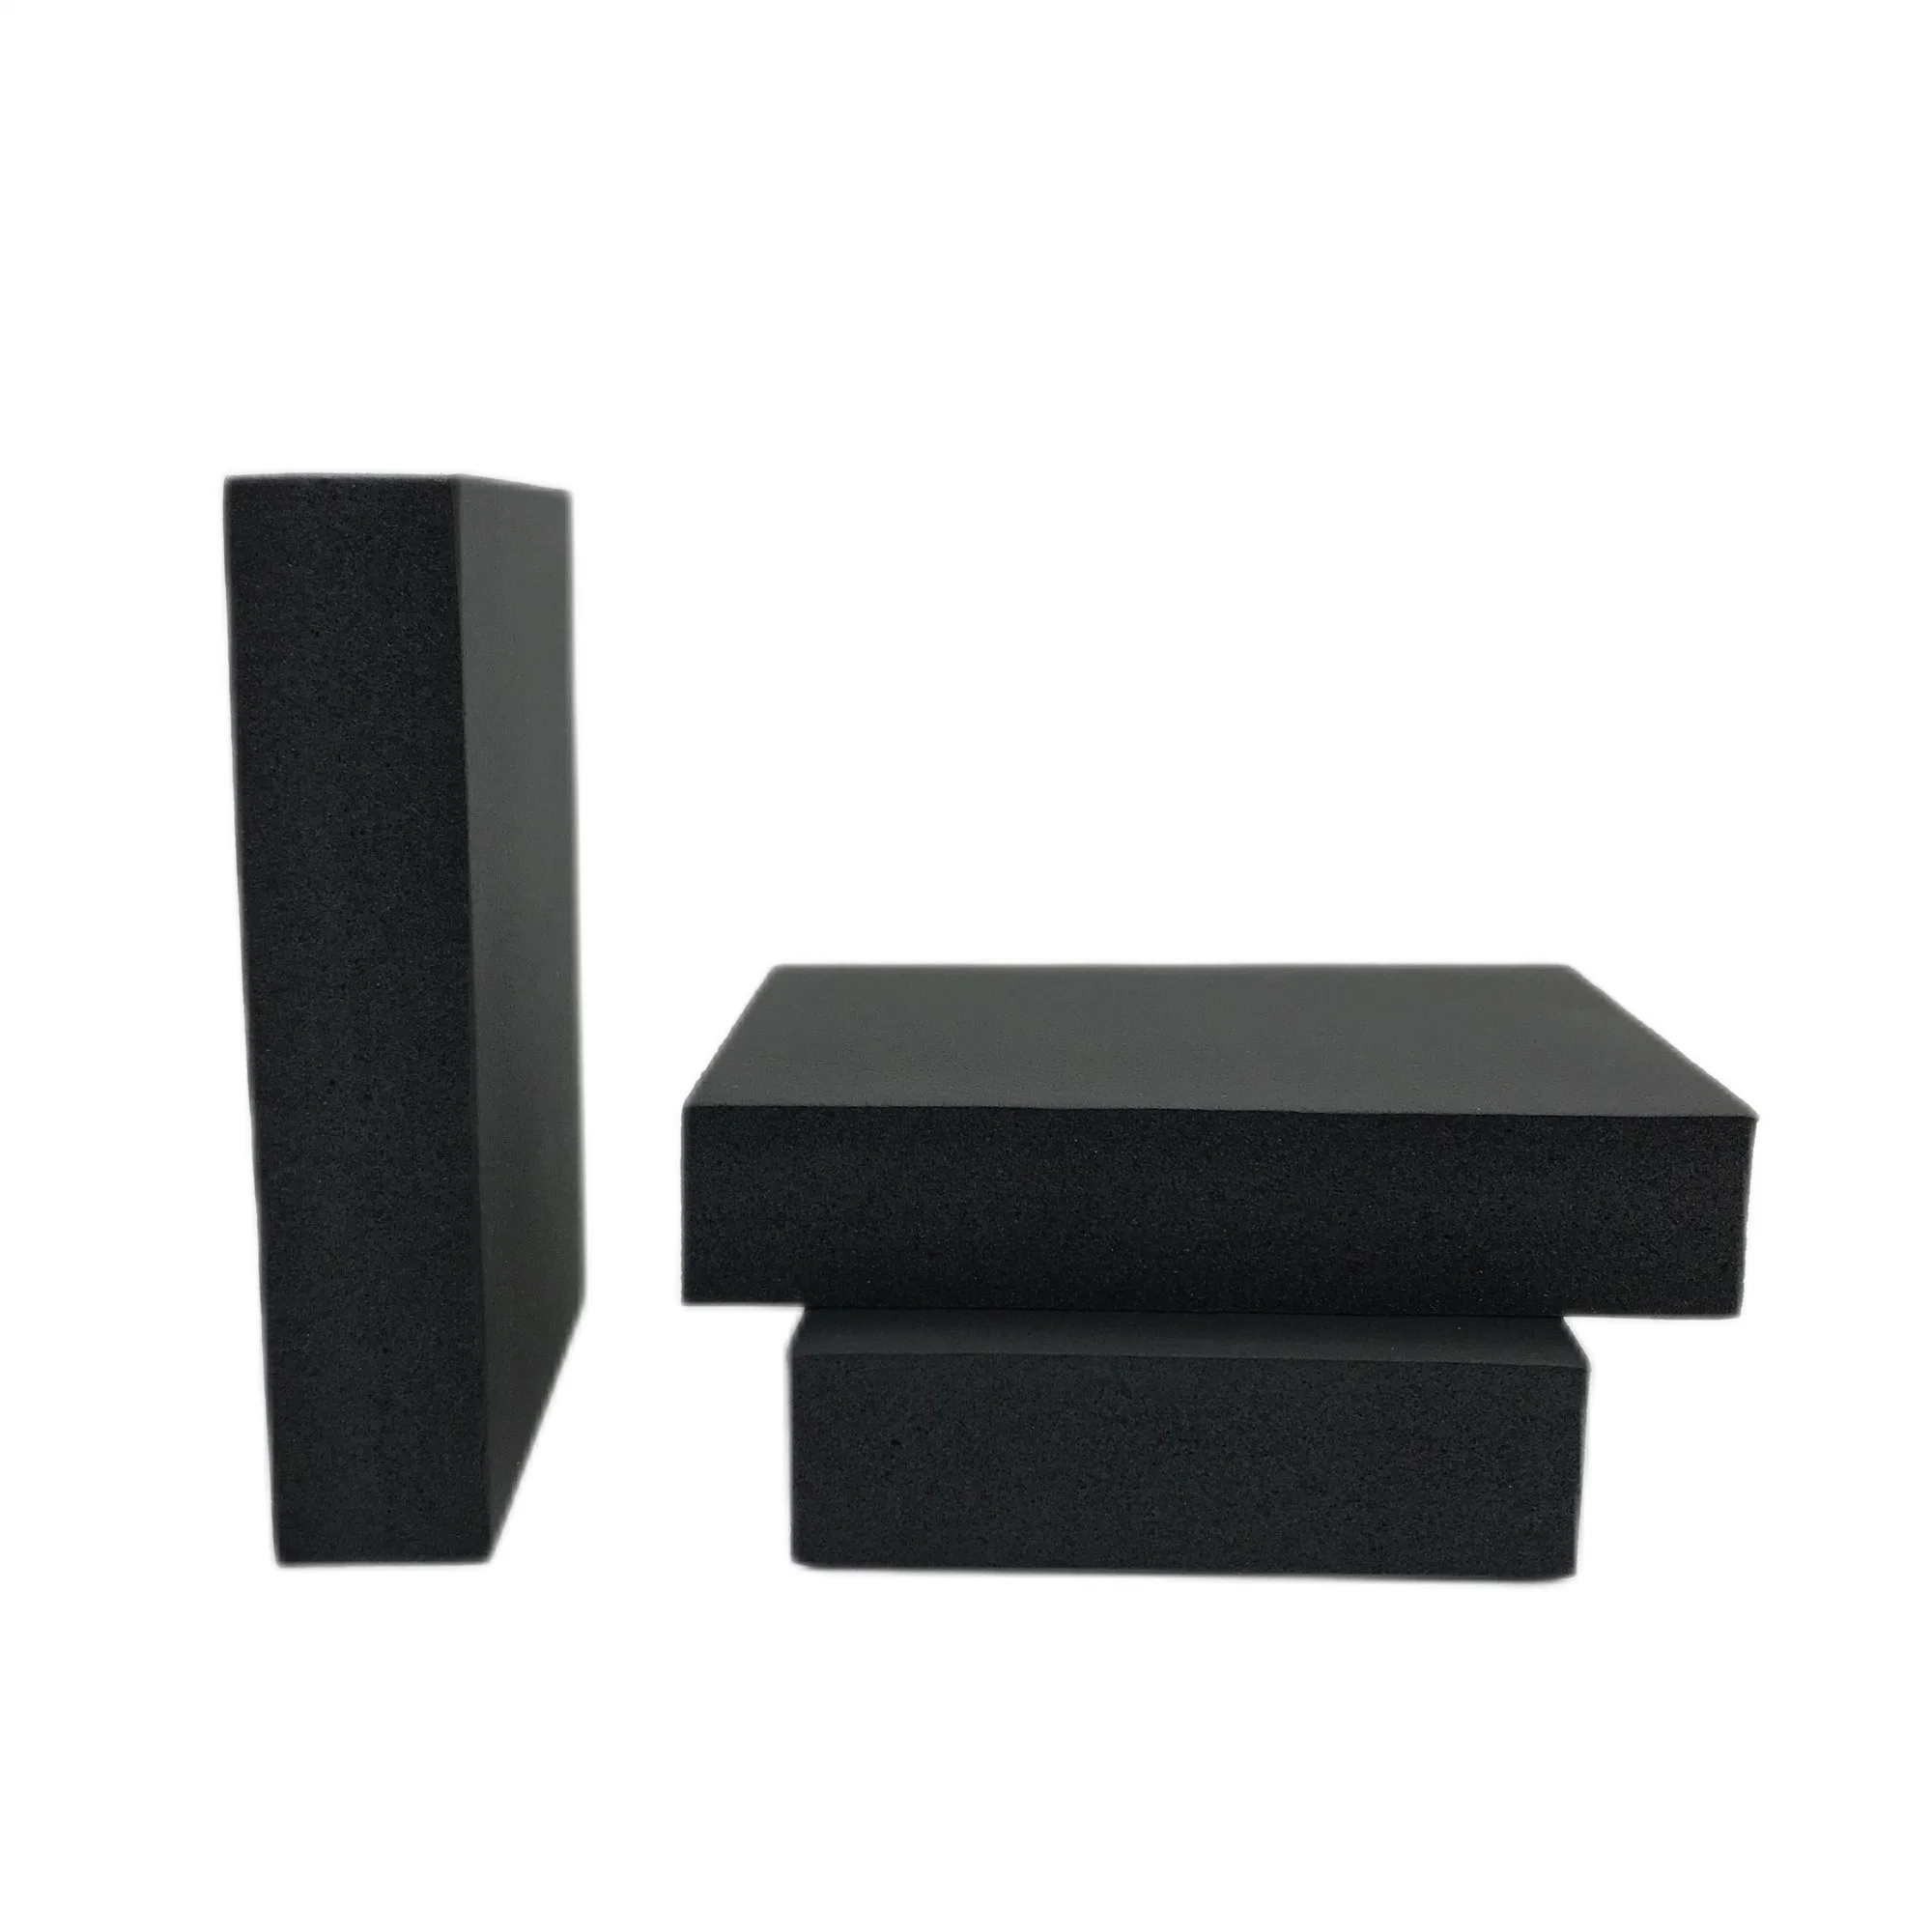 Rubber Foamclosed Cell Structure Acoustic Neoprene Rubber Foam with Adhesive Backing Aluminium Foil